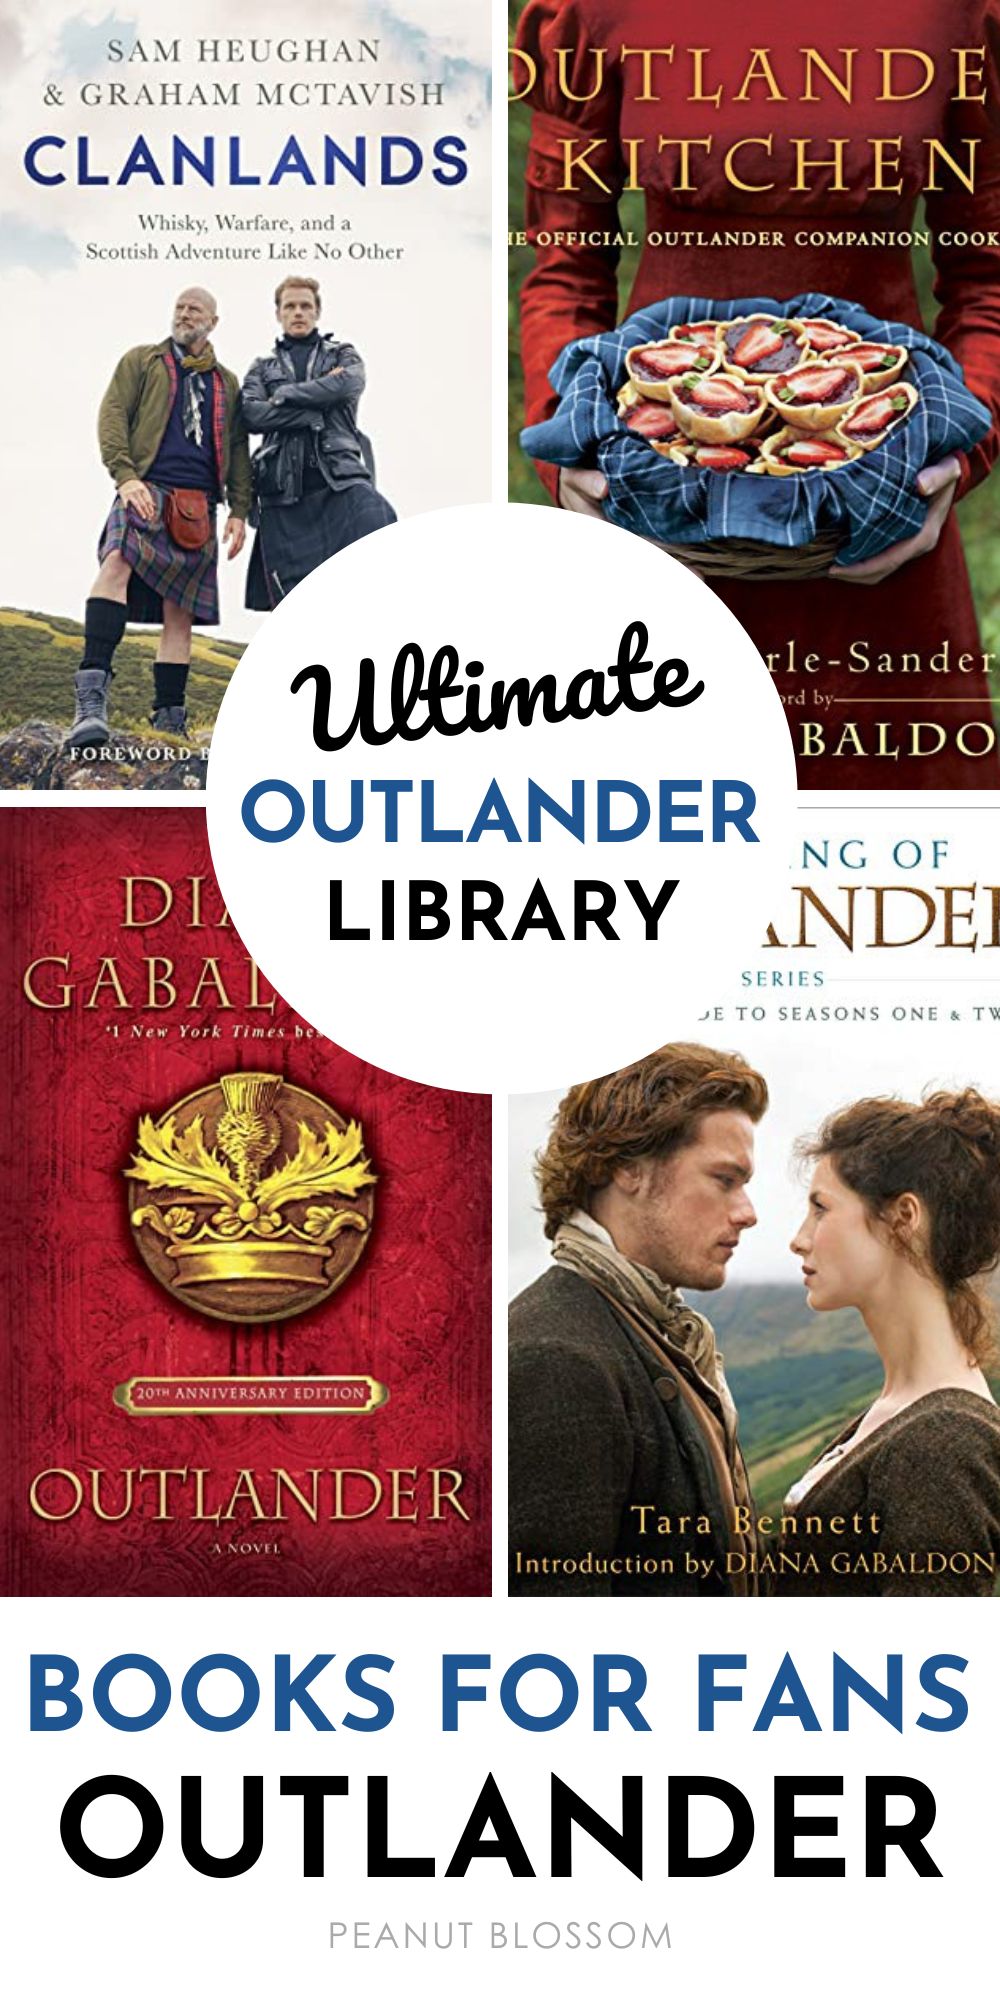 A collage of 4 pictures showing books based off of the Outlander series